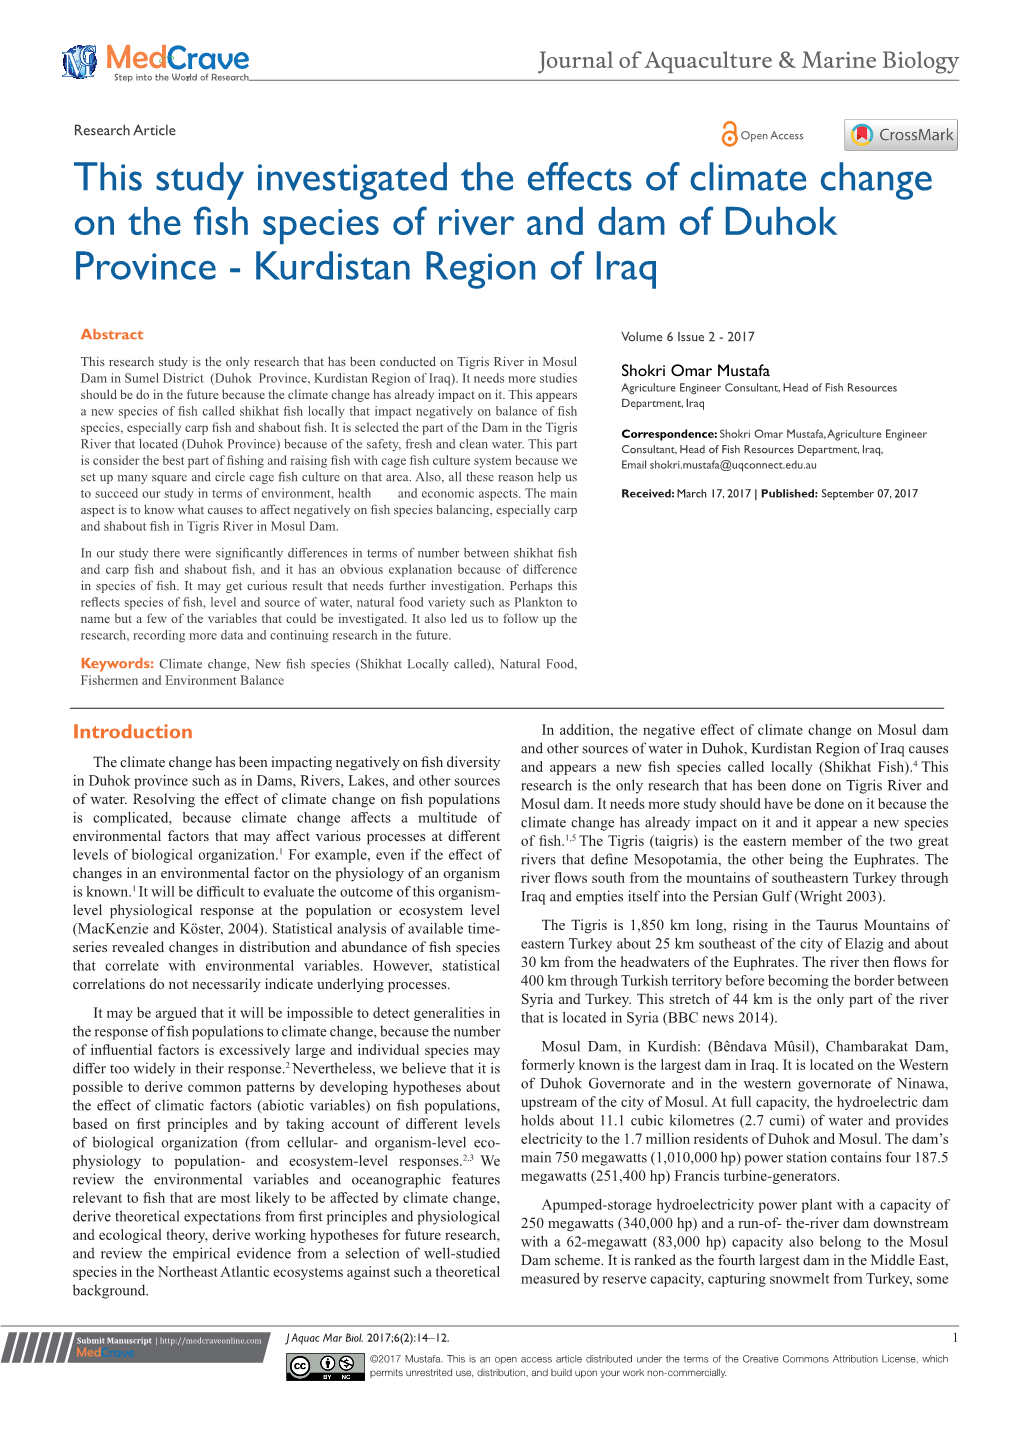 This Study Investigated the Effects of Climate Change on the Fish Species of River and Dam of Duhok Province - Kurdistan Region of Iraq